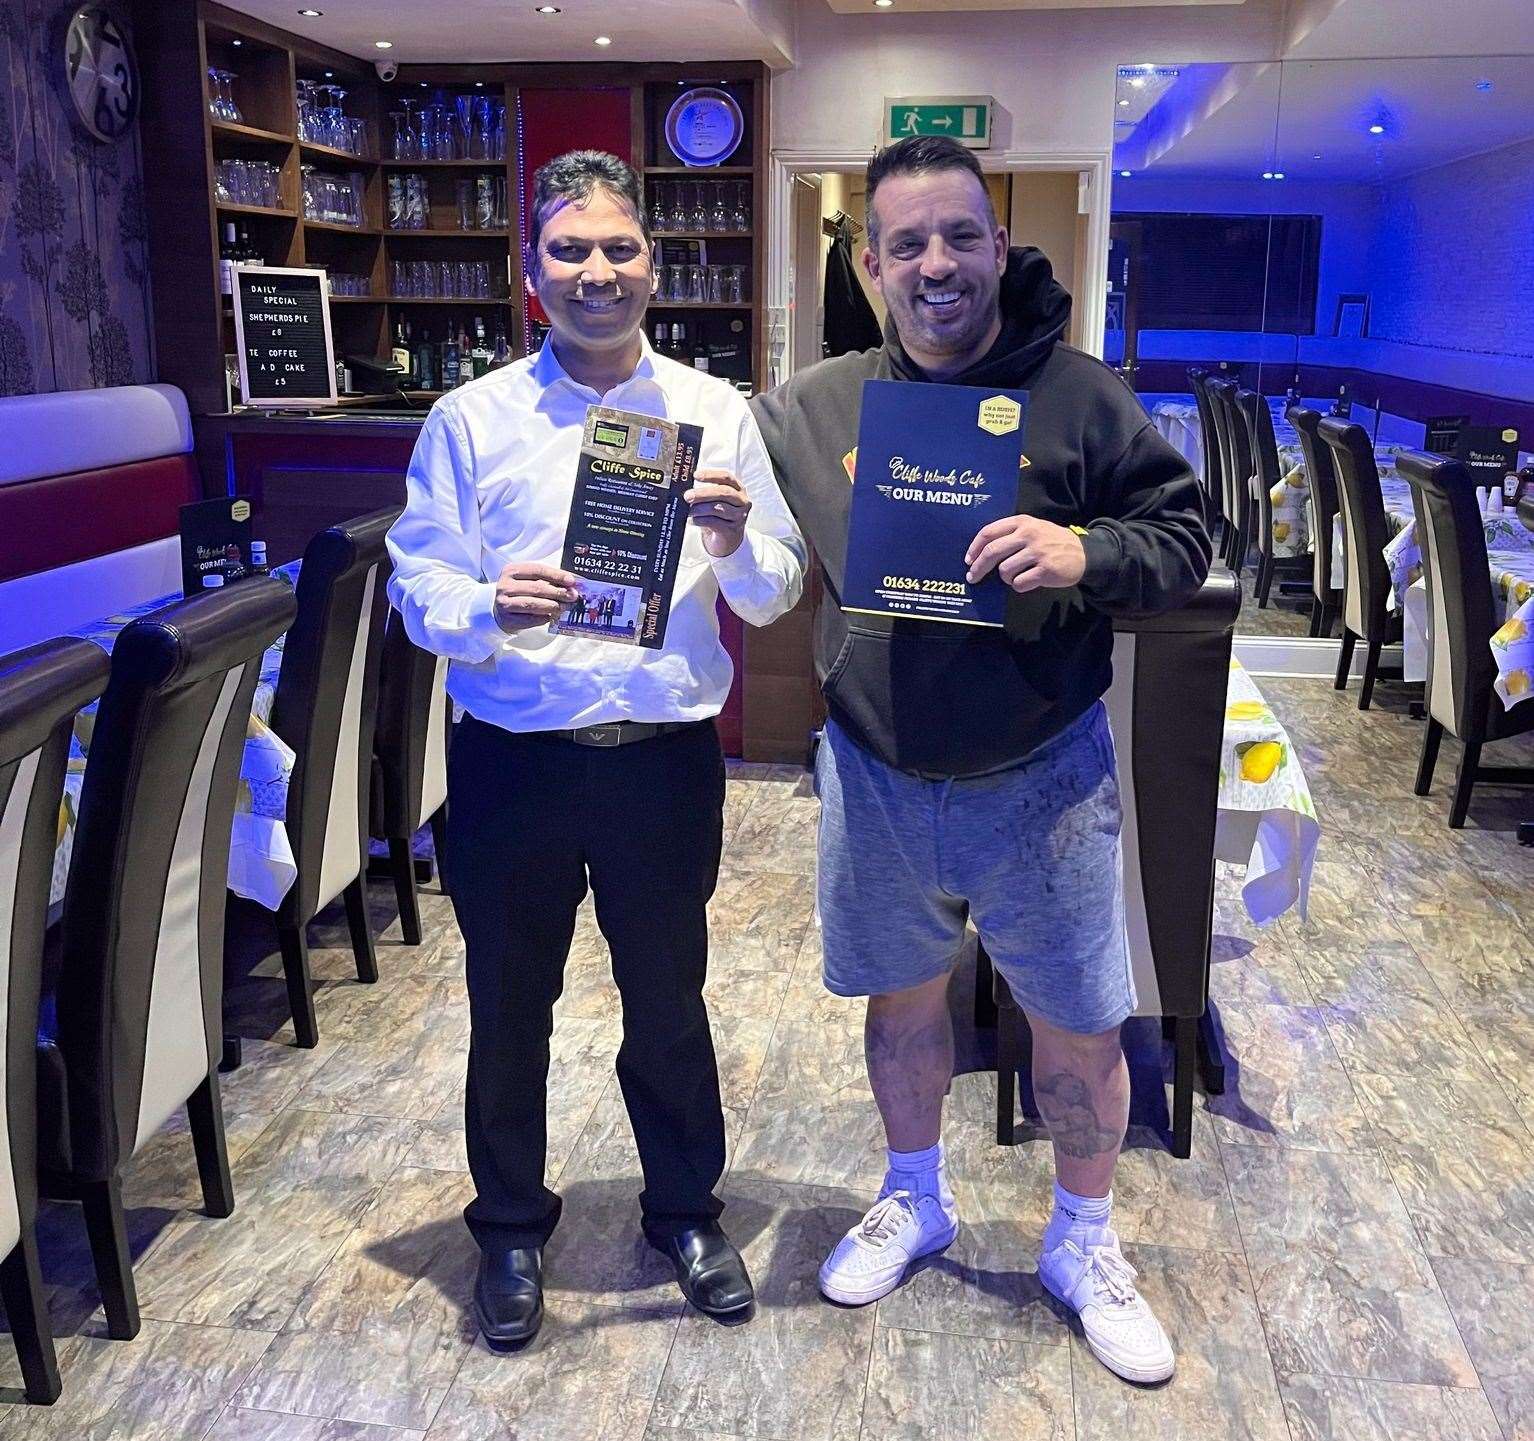 From left: Owner of Cliffe Spice Sheikh Islam with Brian. Picture: Brian Sanders